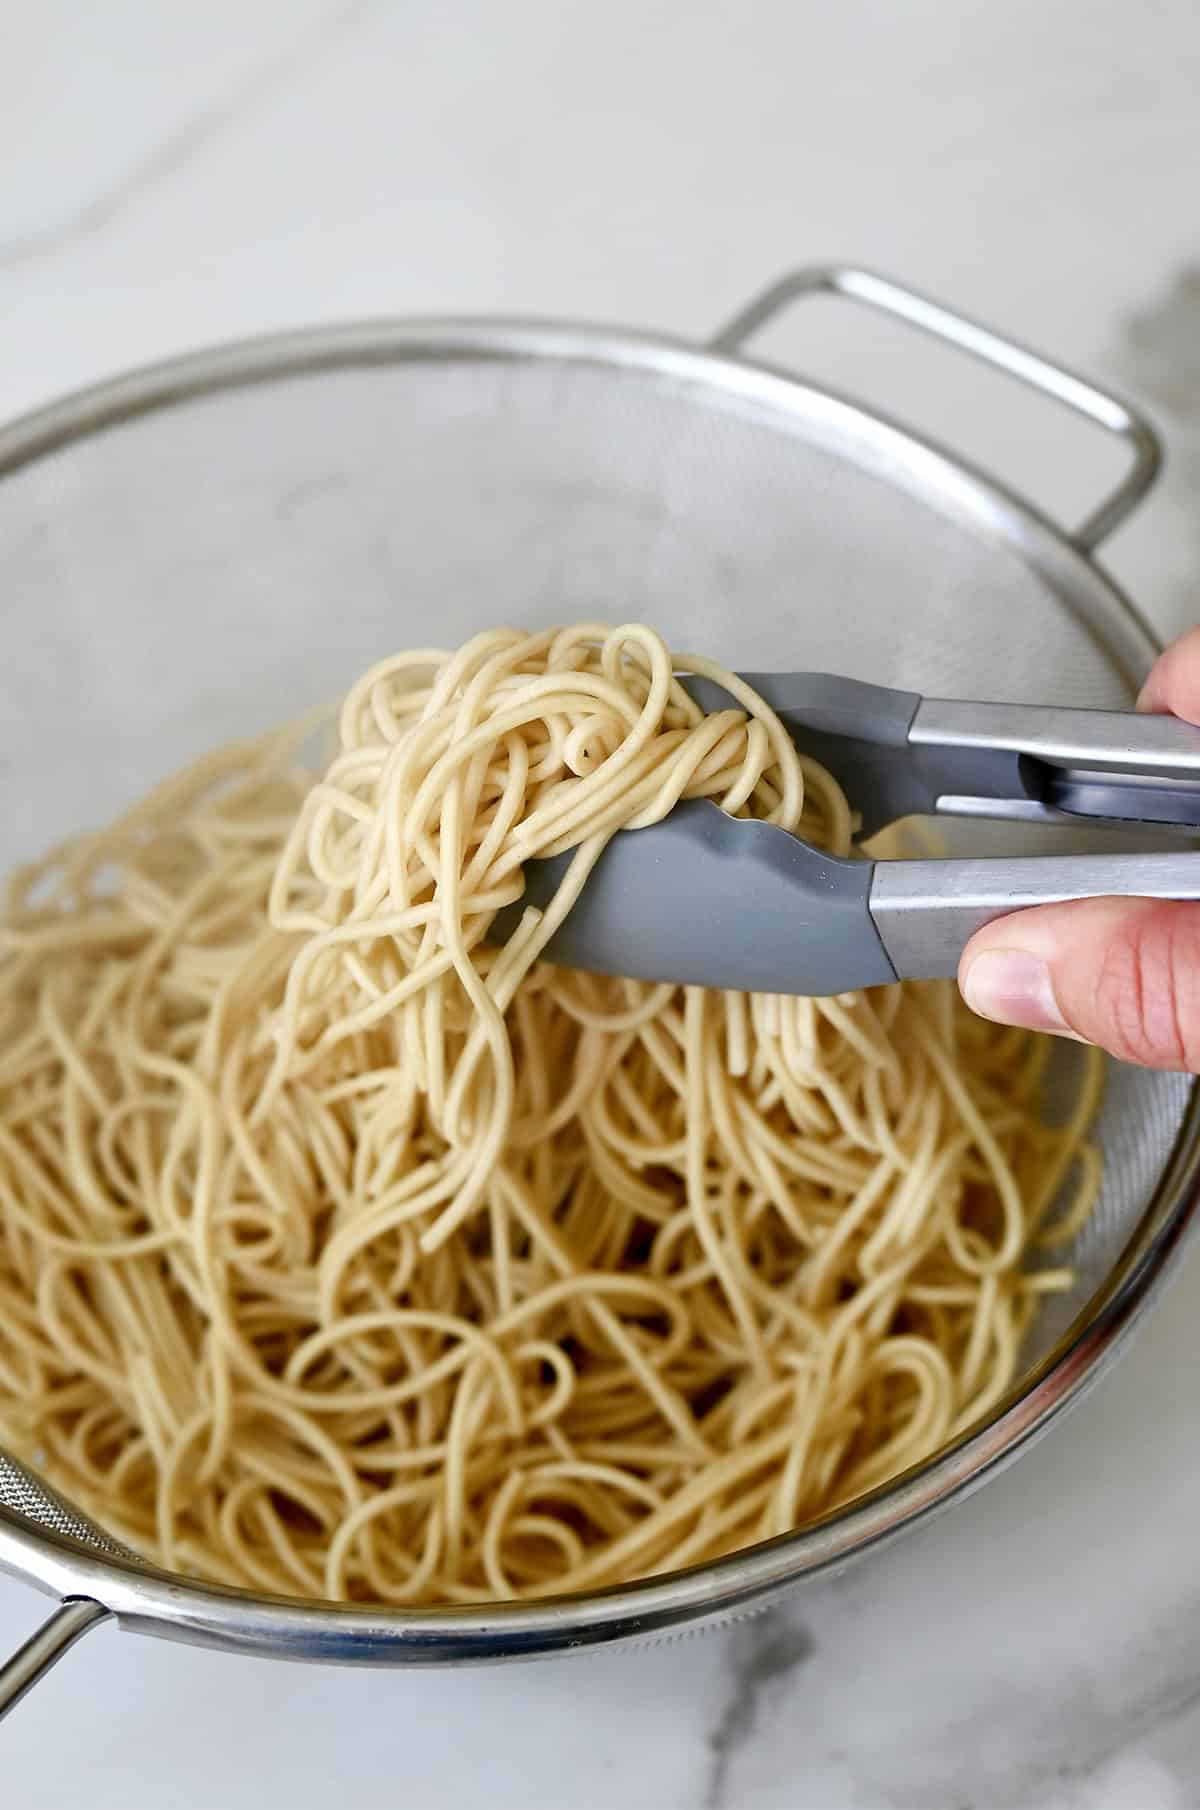 Tongs grabbing cooked lo mein noodles from a mesh strainer.